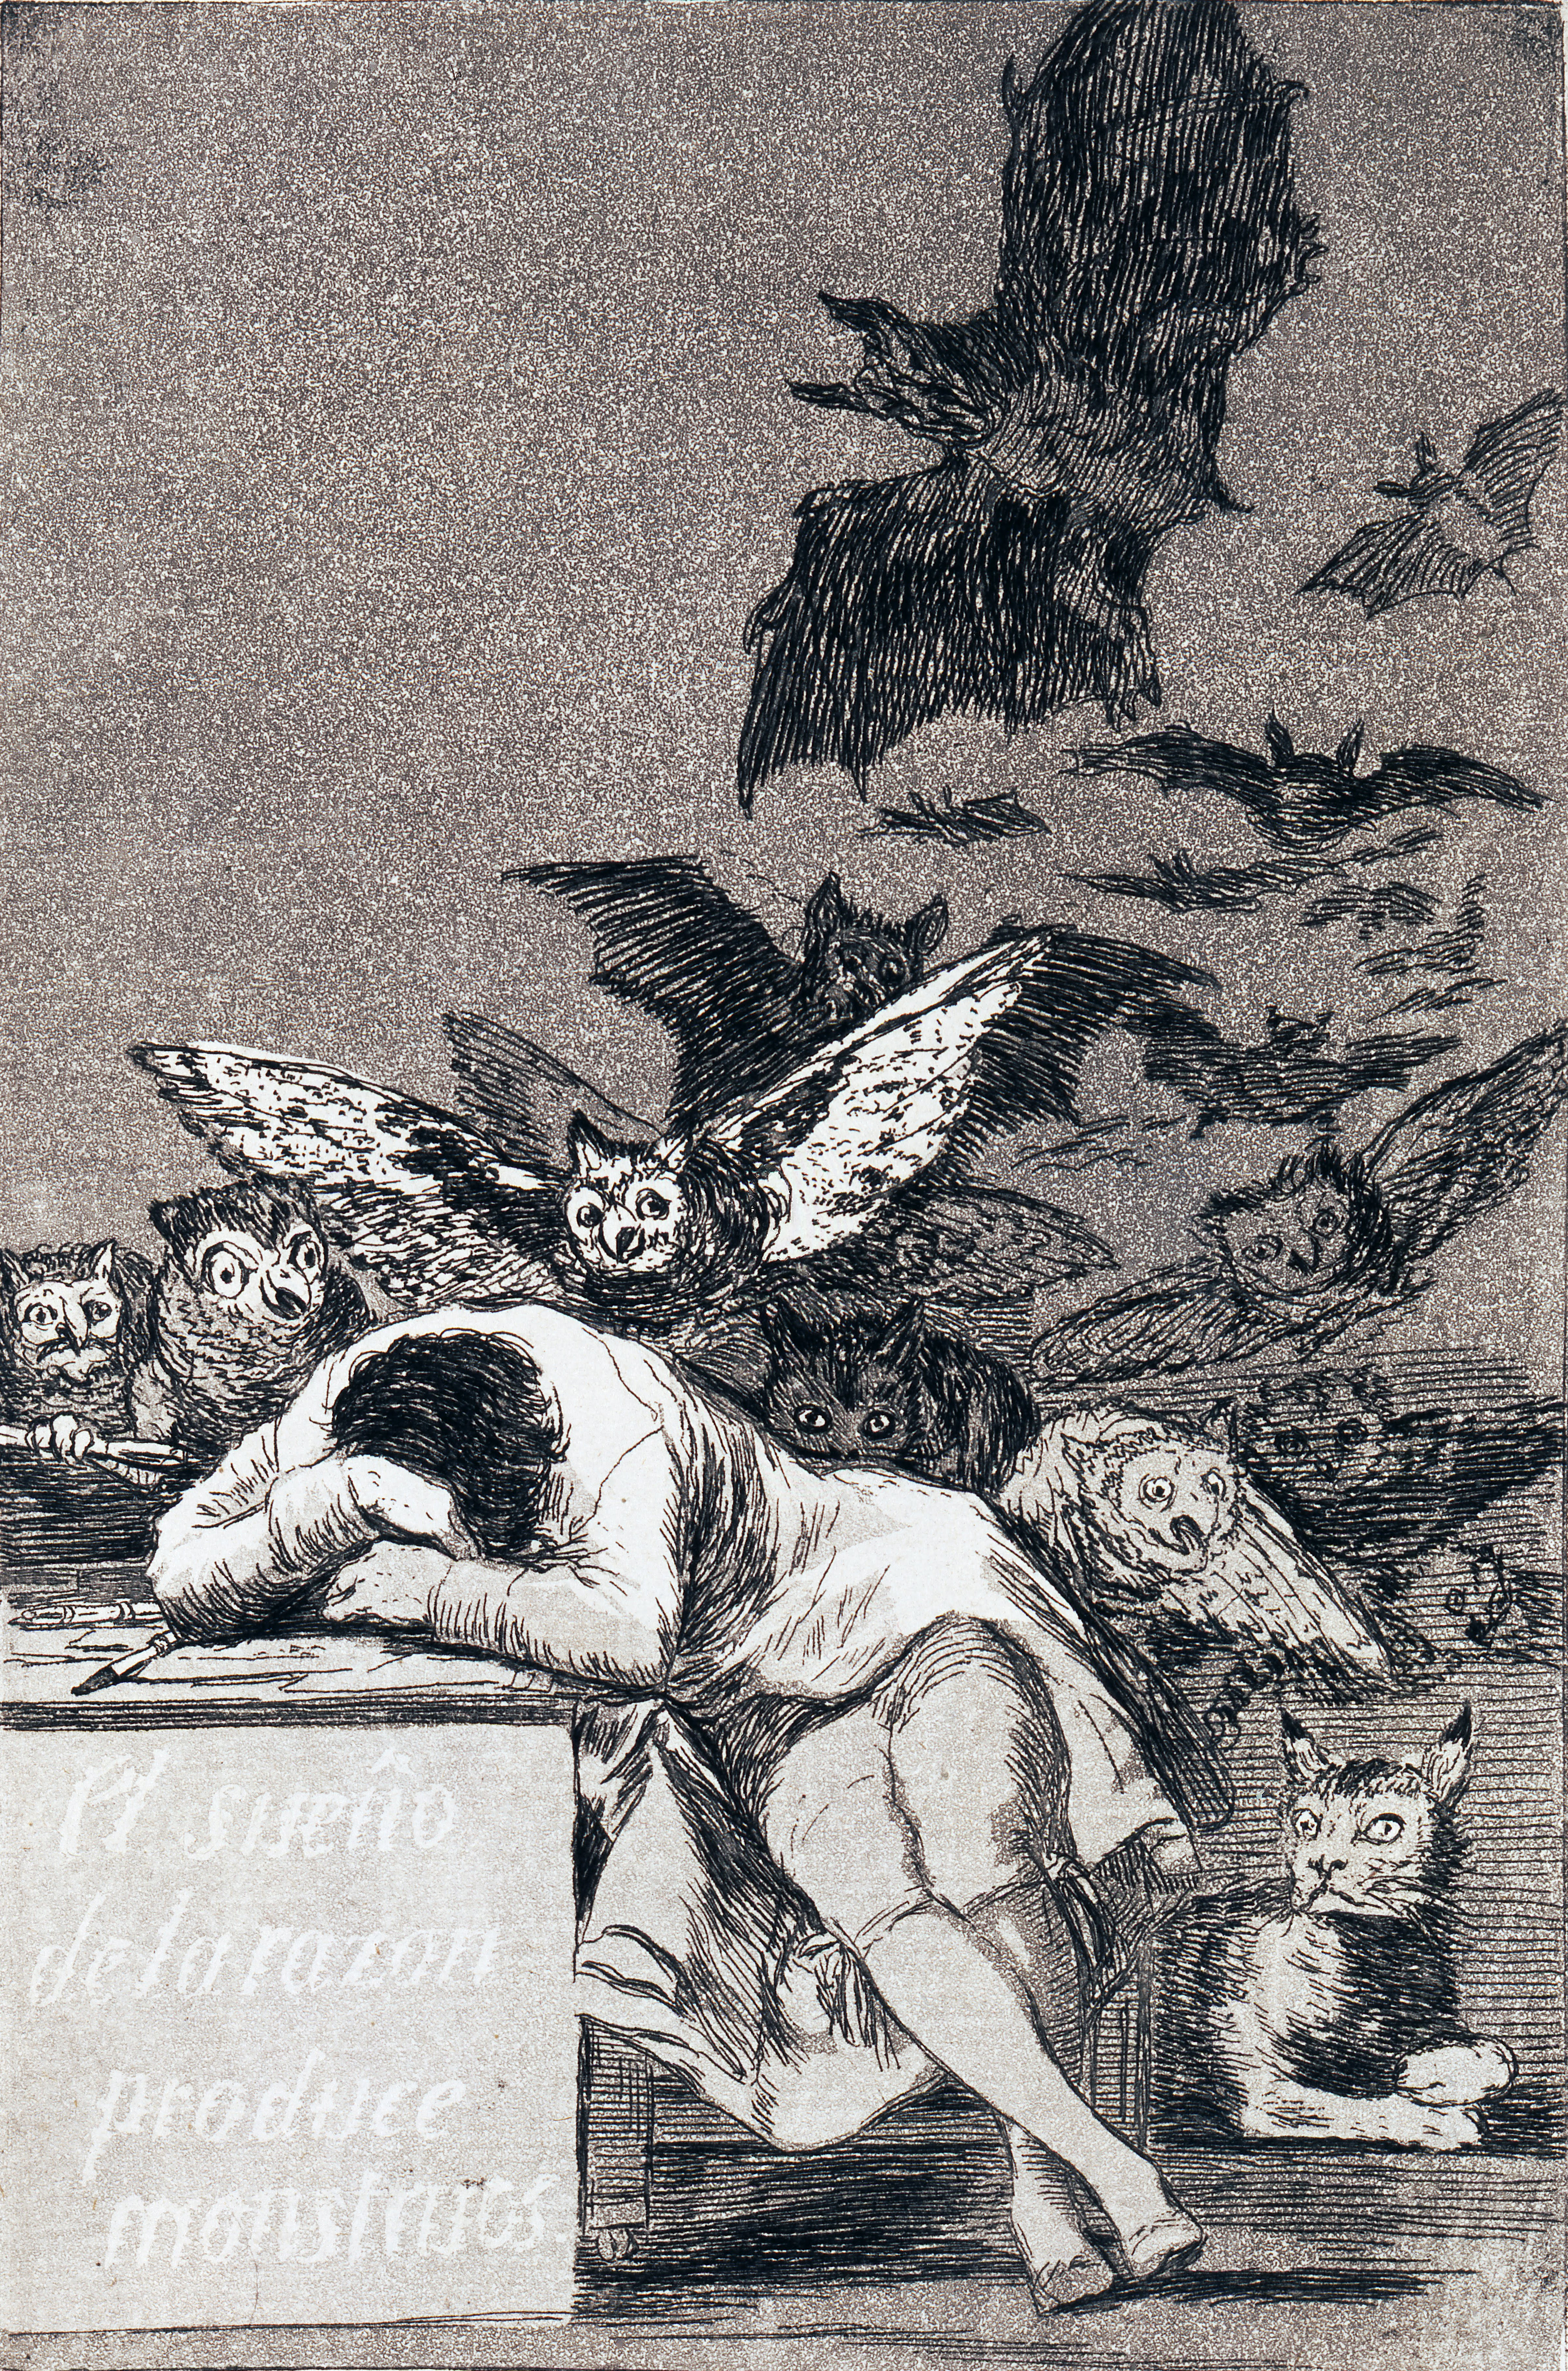 francisco_de_goya_y_lucientes_-_the_dream_of_reason_brings_forth_monsters_-_google_art_project